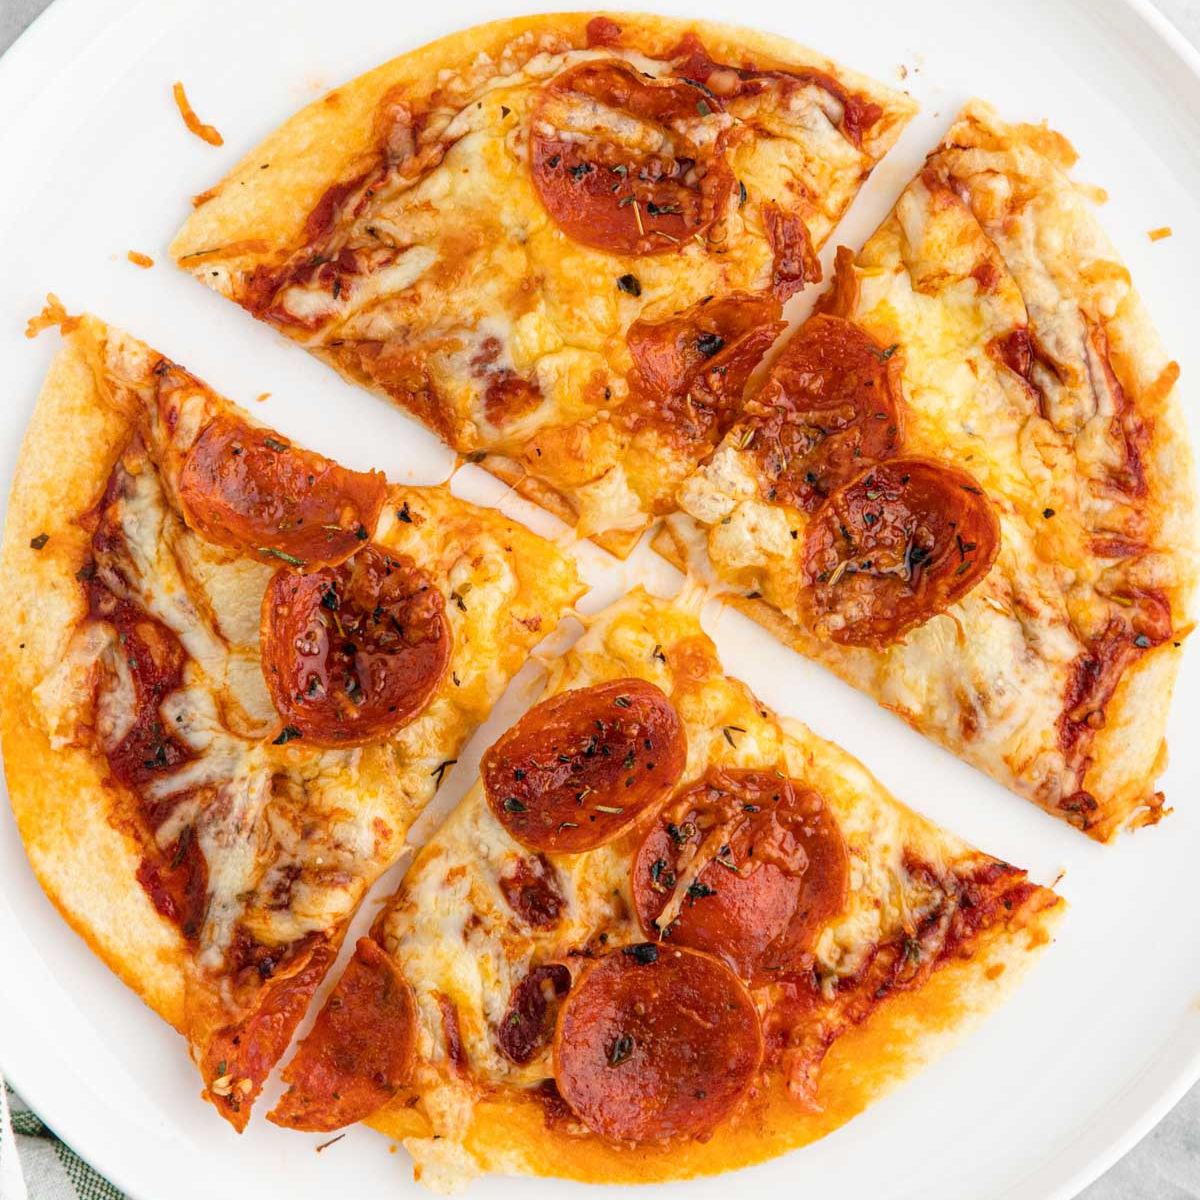 EASY AIR FRYER TORTILLA PIZZA RECIPE (READY IN 5 MINUTES!) 